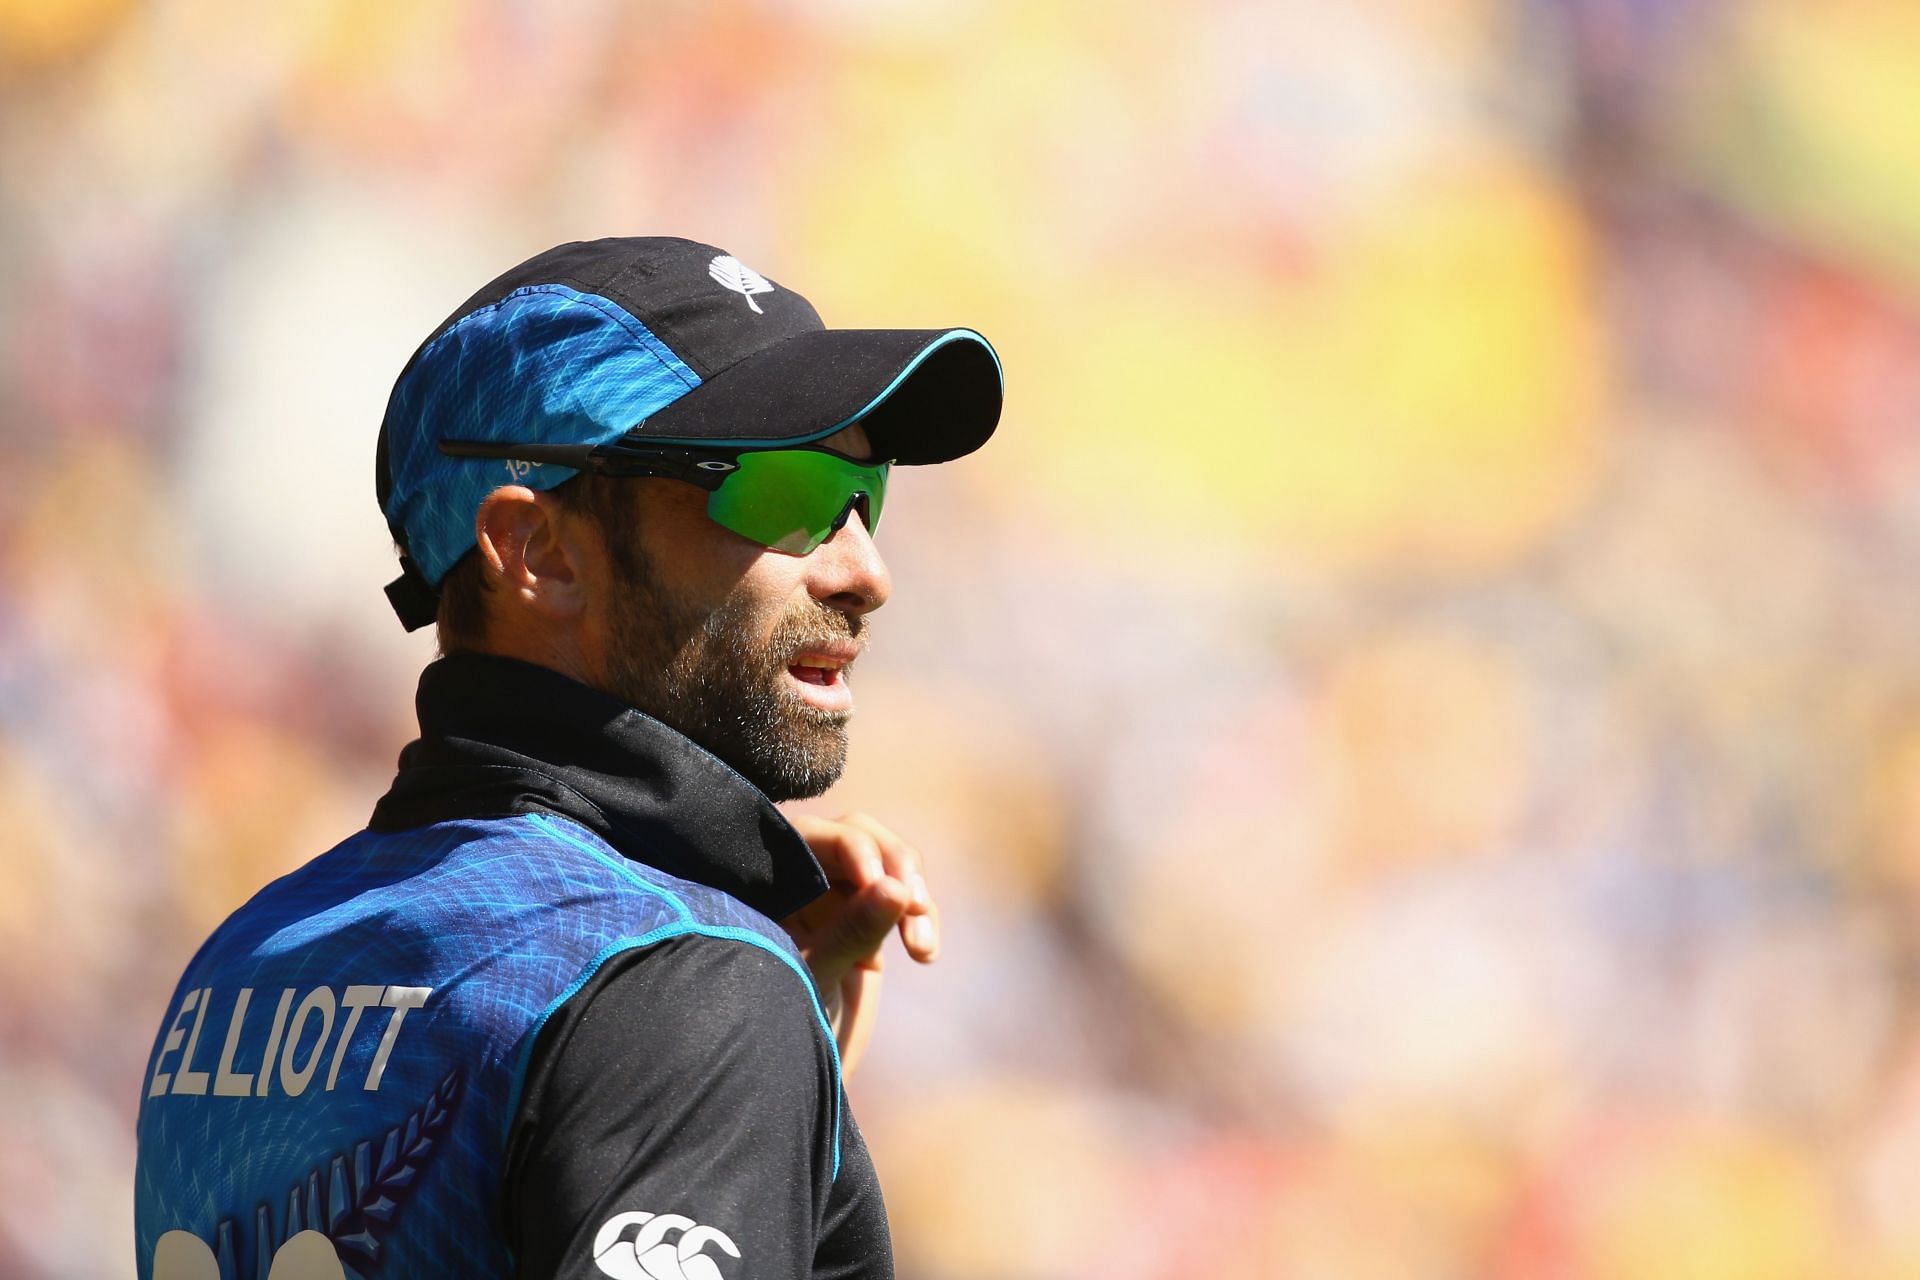 Grant Elliott is regarded as one of the best all-rounders for New Zealand (Image: Getty)